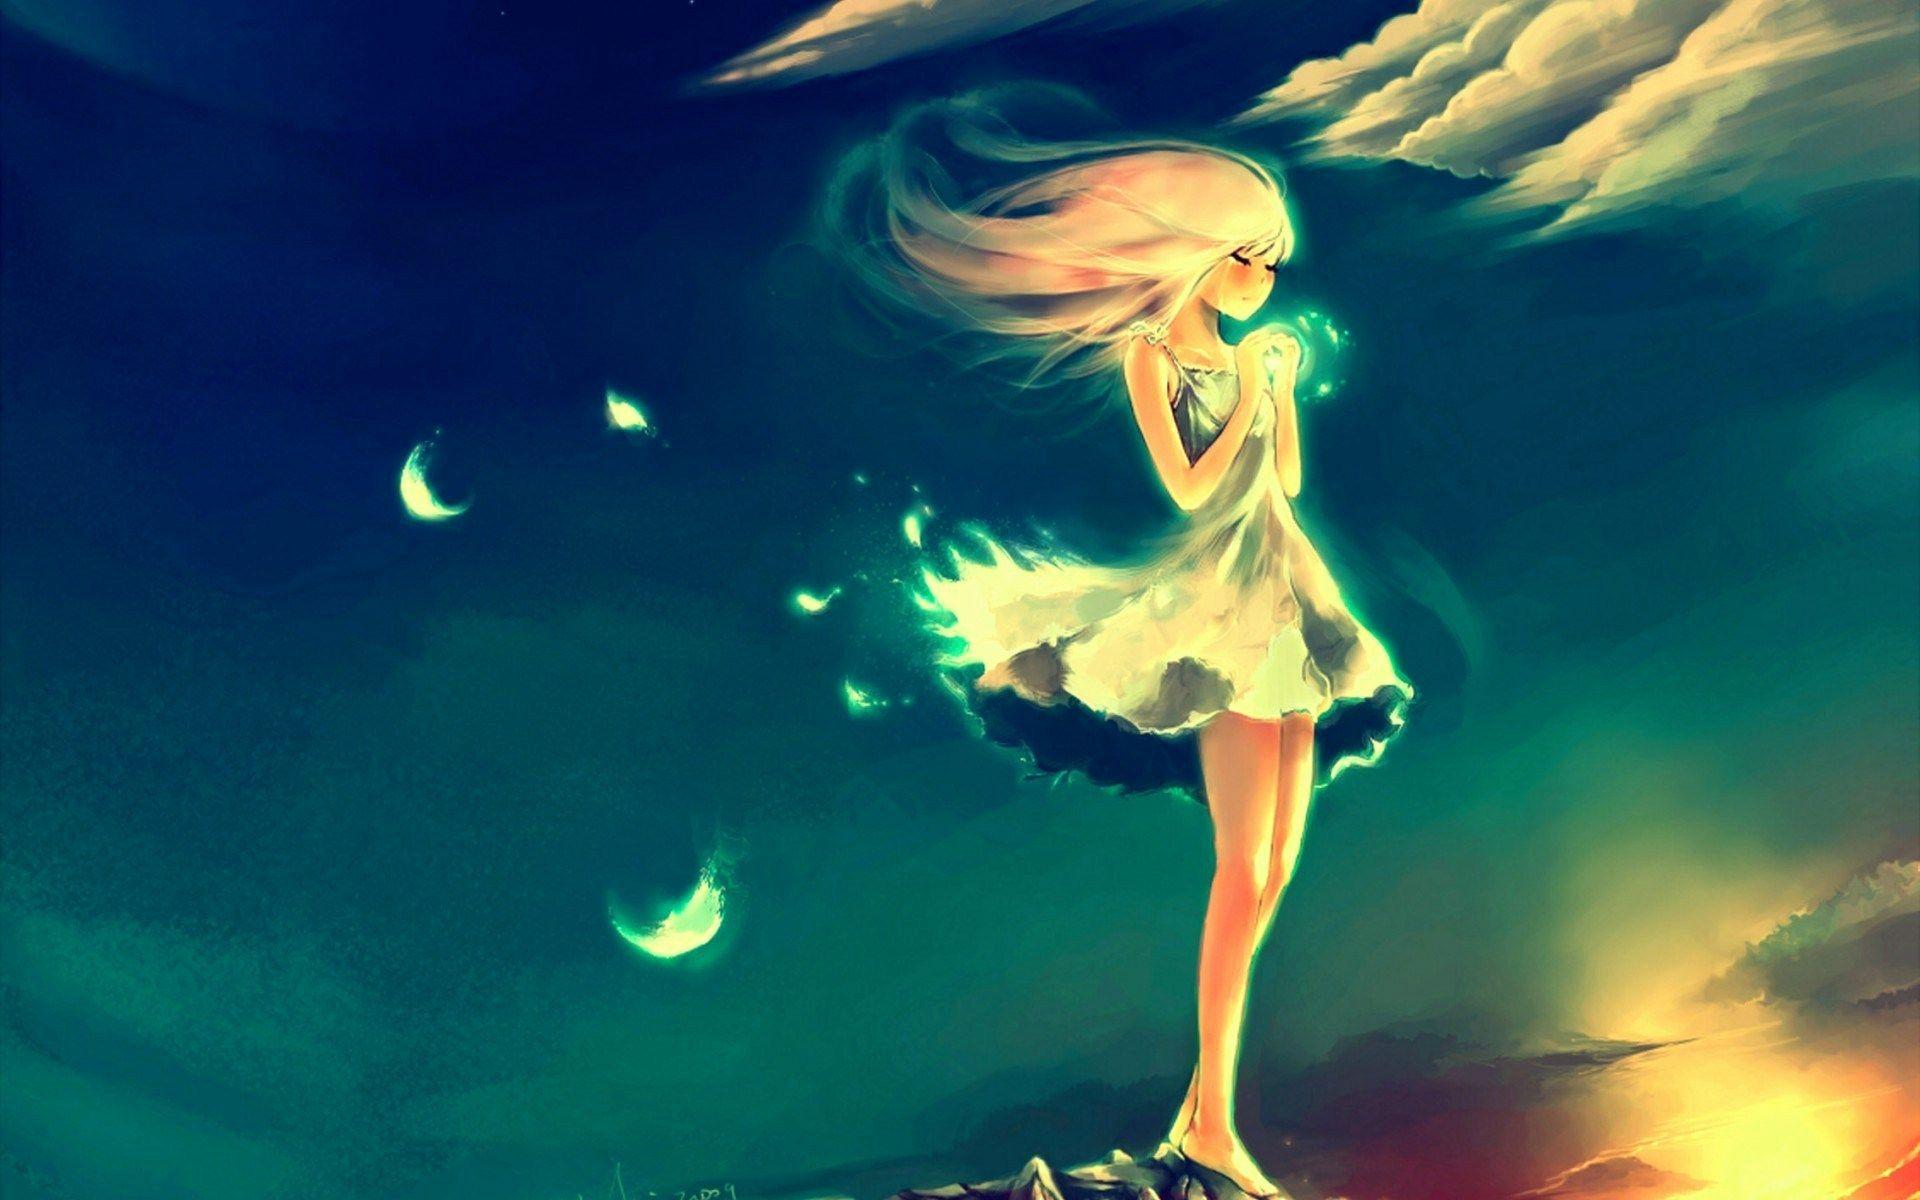 Anime Wallpaper Awesome Angel Cry Alone so Sad Night Sky Feather